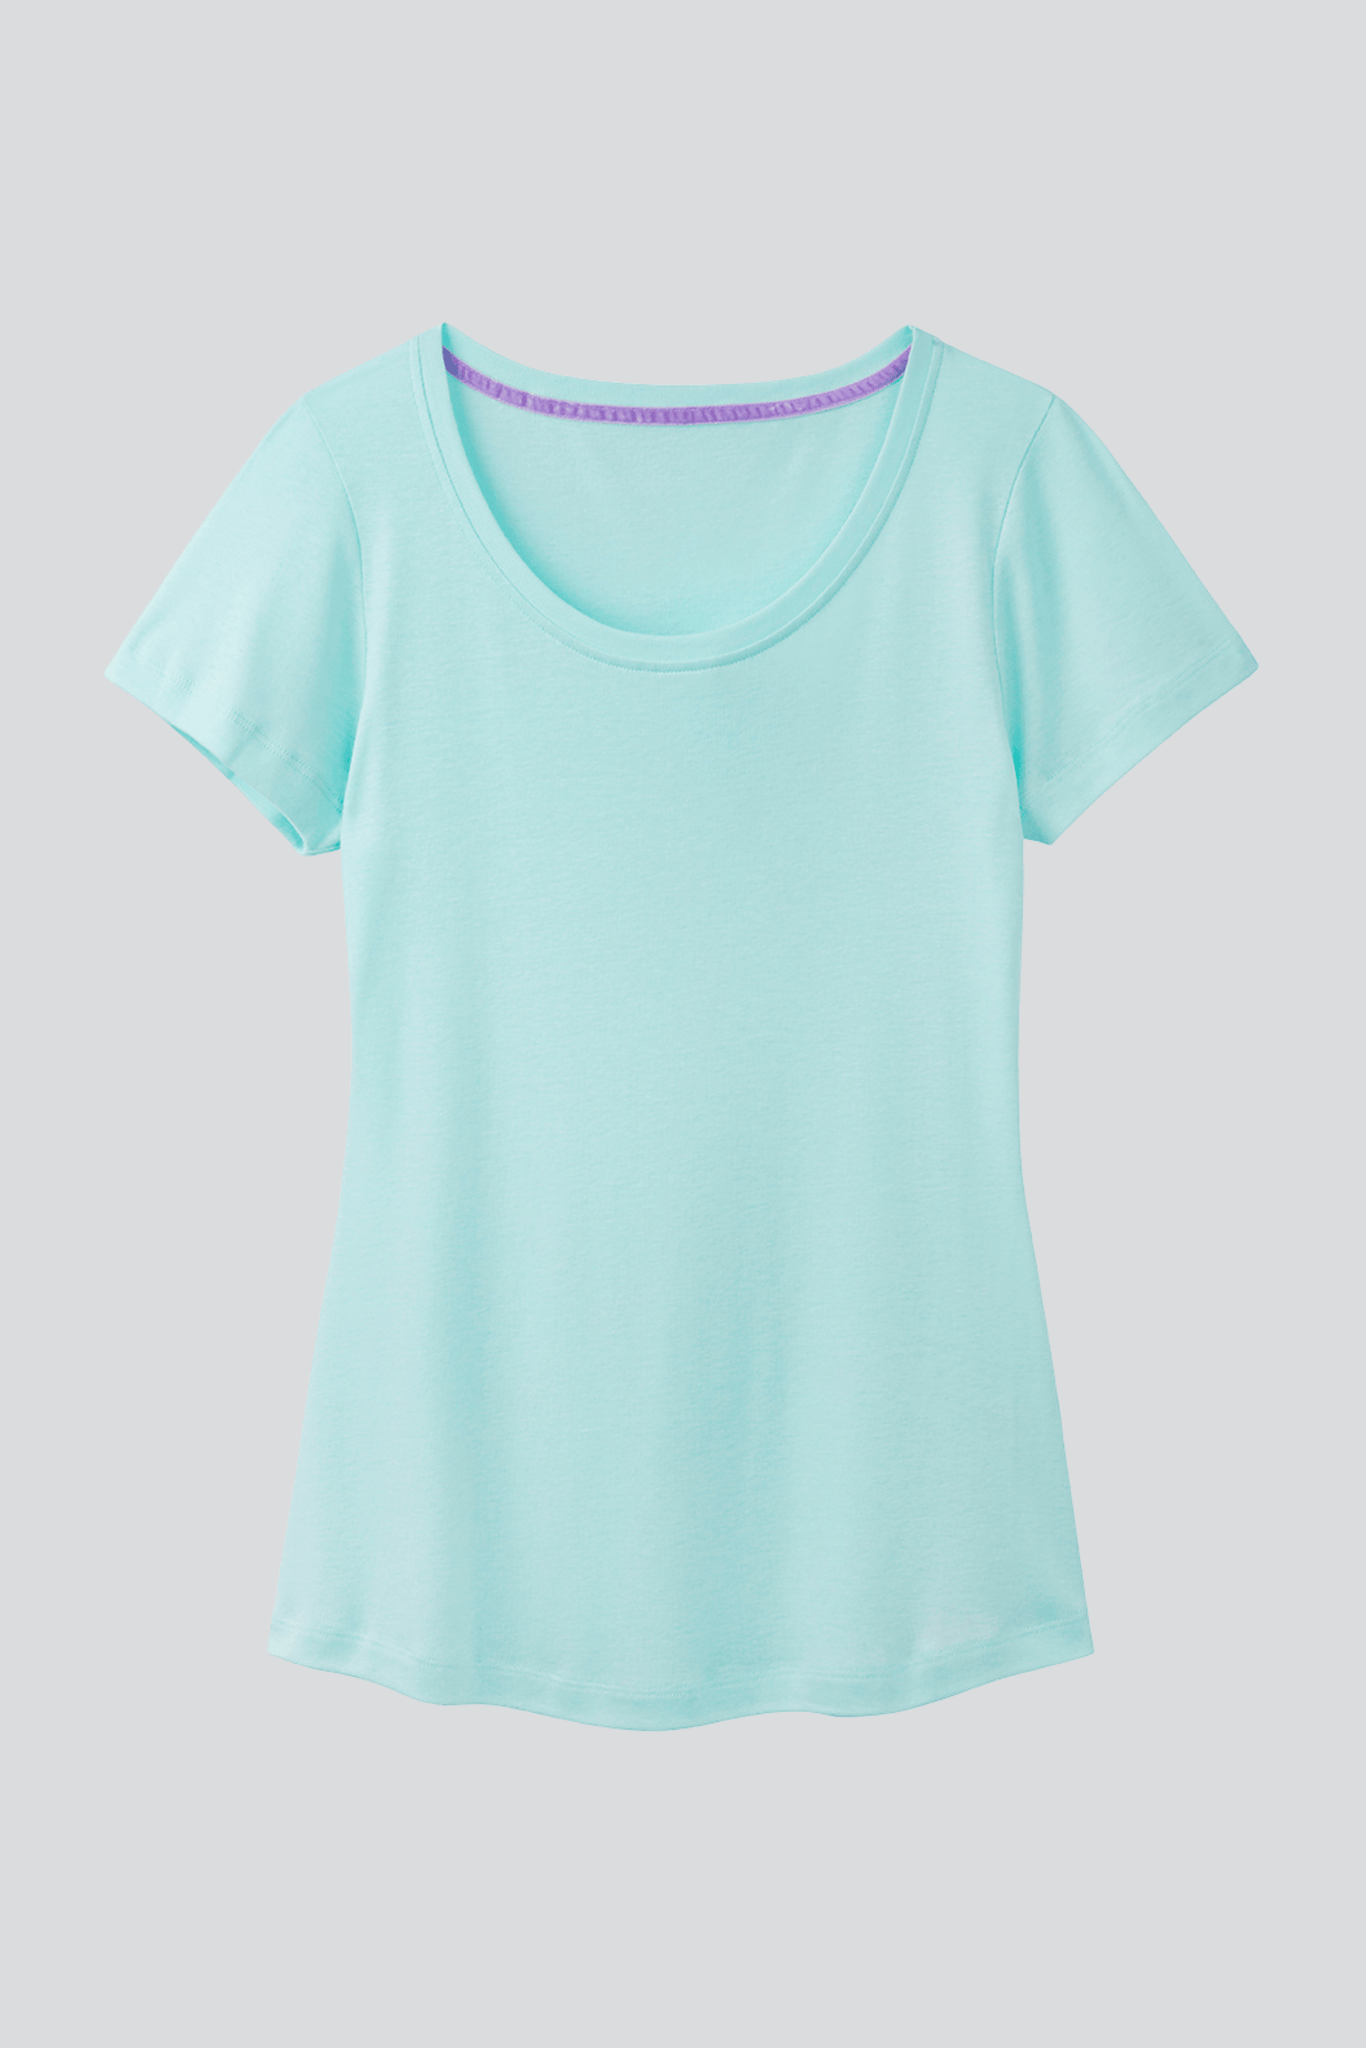 Women's High Quality Scoop Neck Cotton Modal Blend T-shirt in Light Green - Flattering Short Sleeve T-shirt by Lavender Hill Clothing